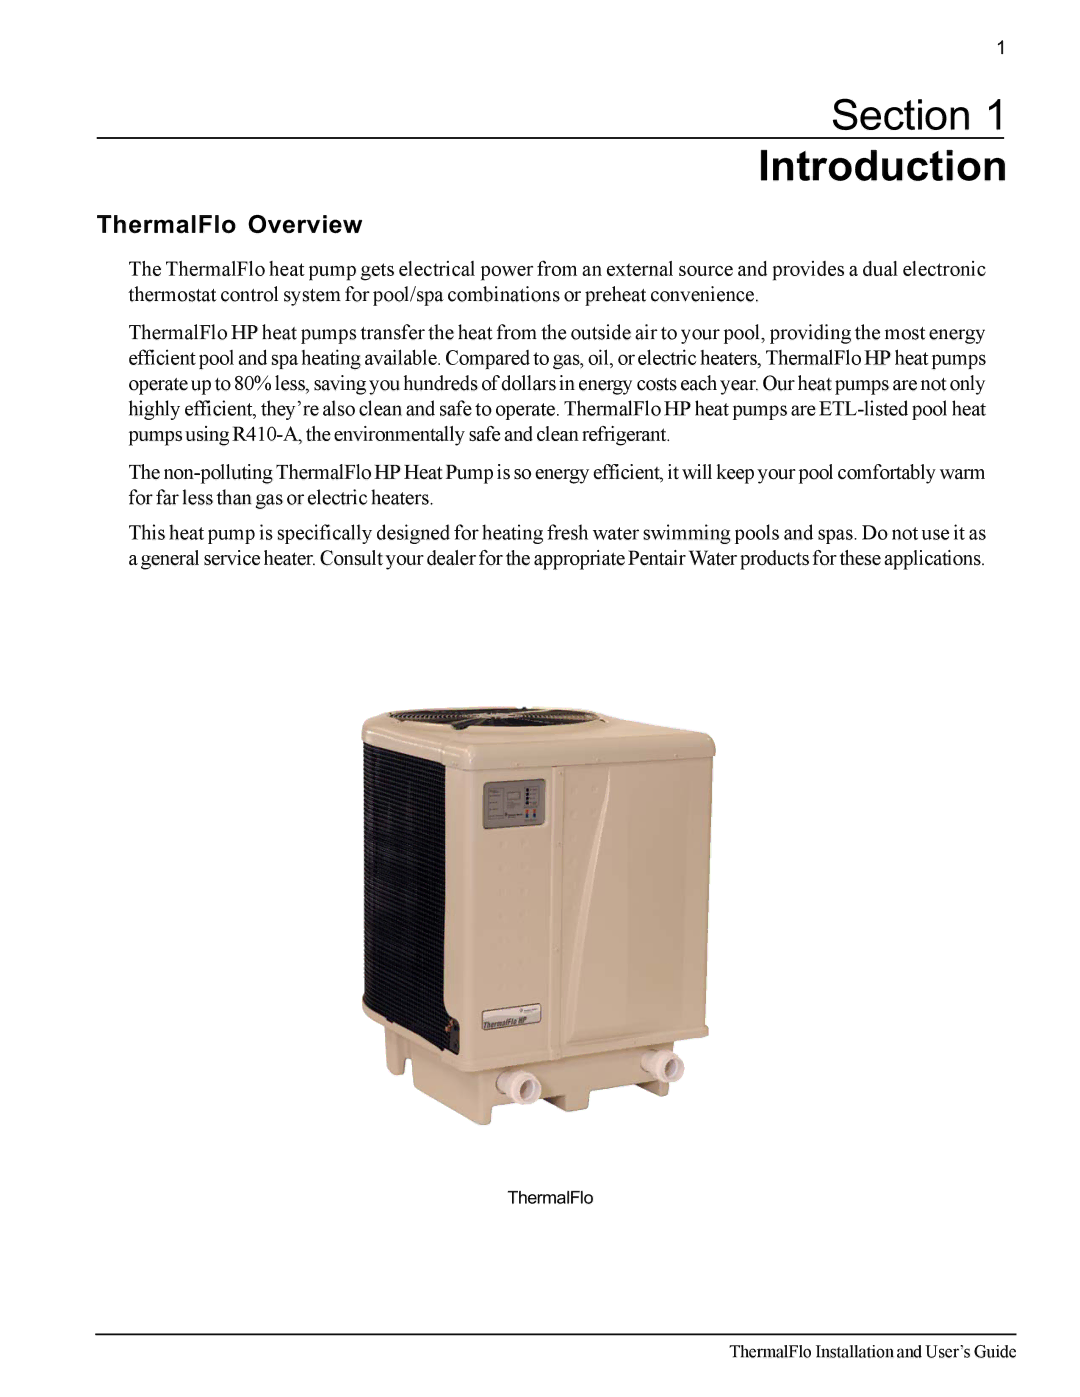 Pentair important safety instructions Section Introduction, ThermalFlo Overview 